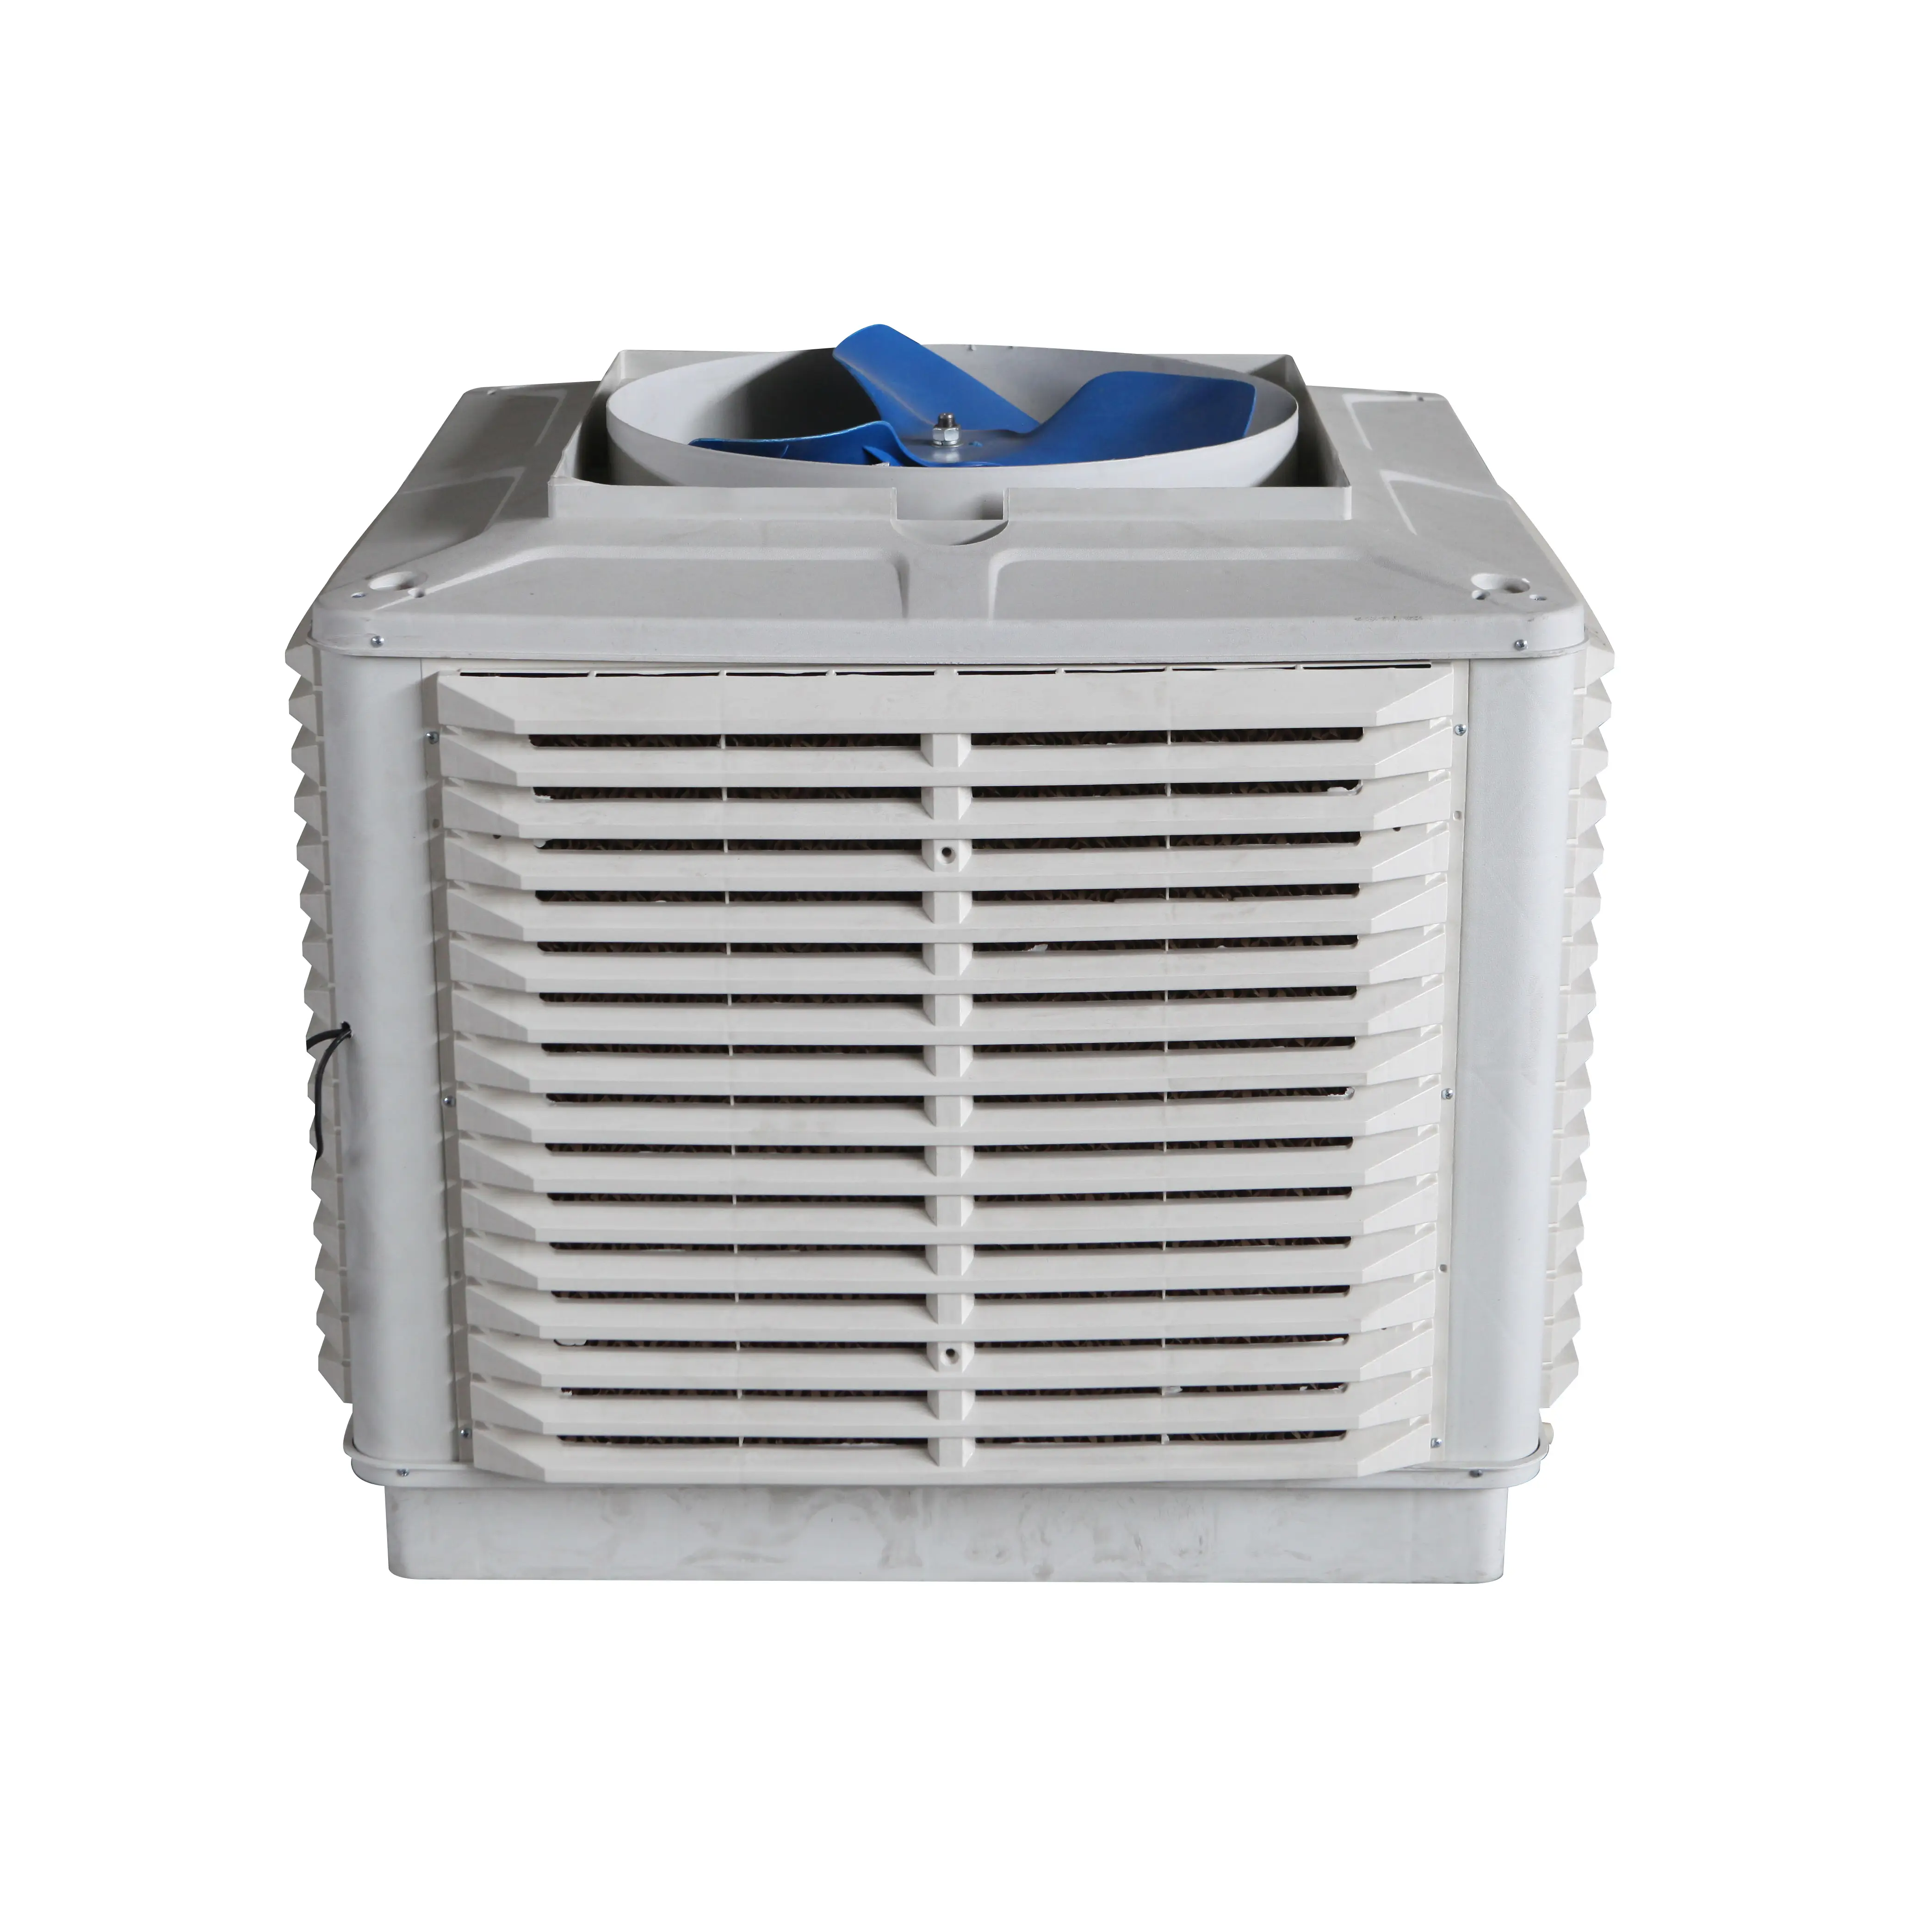 Agriculture Products Industrial Air Cooler Air Conditioning Systems for Warehouse Factory Cooling